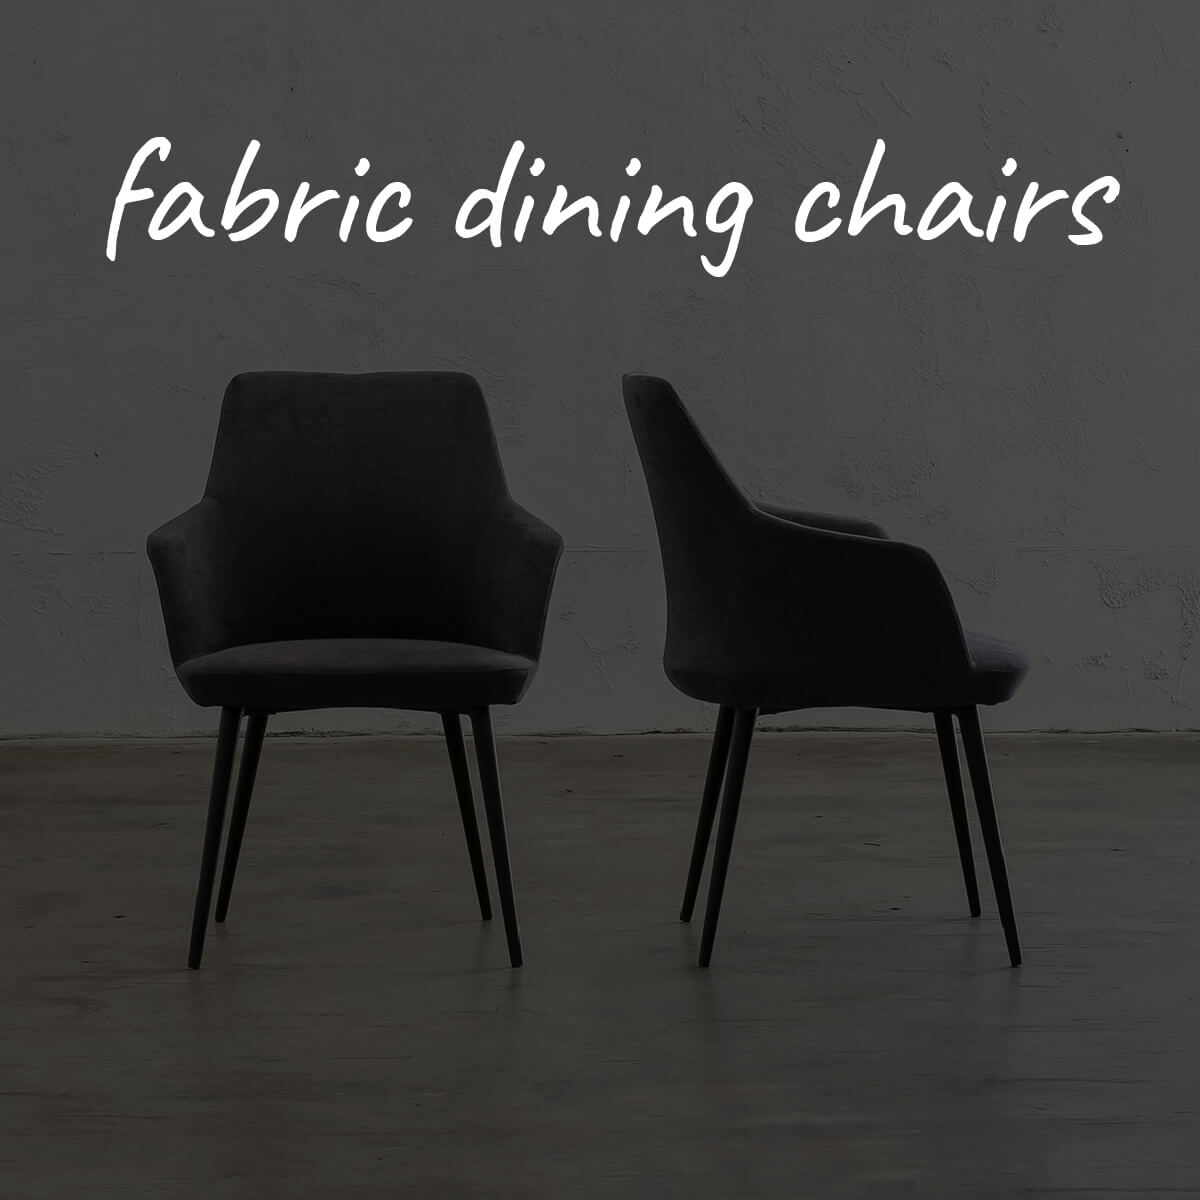 FABRIC DINING CHAIRS